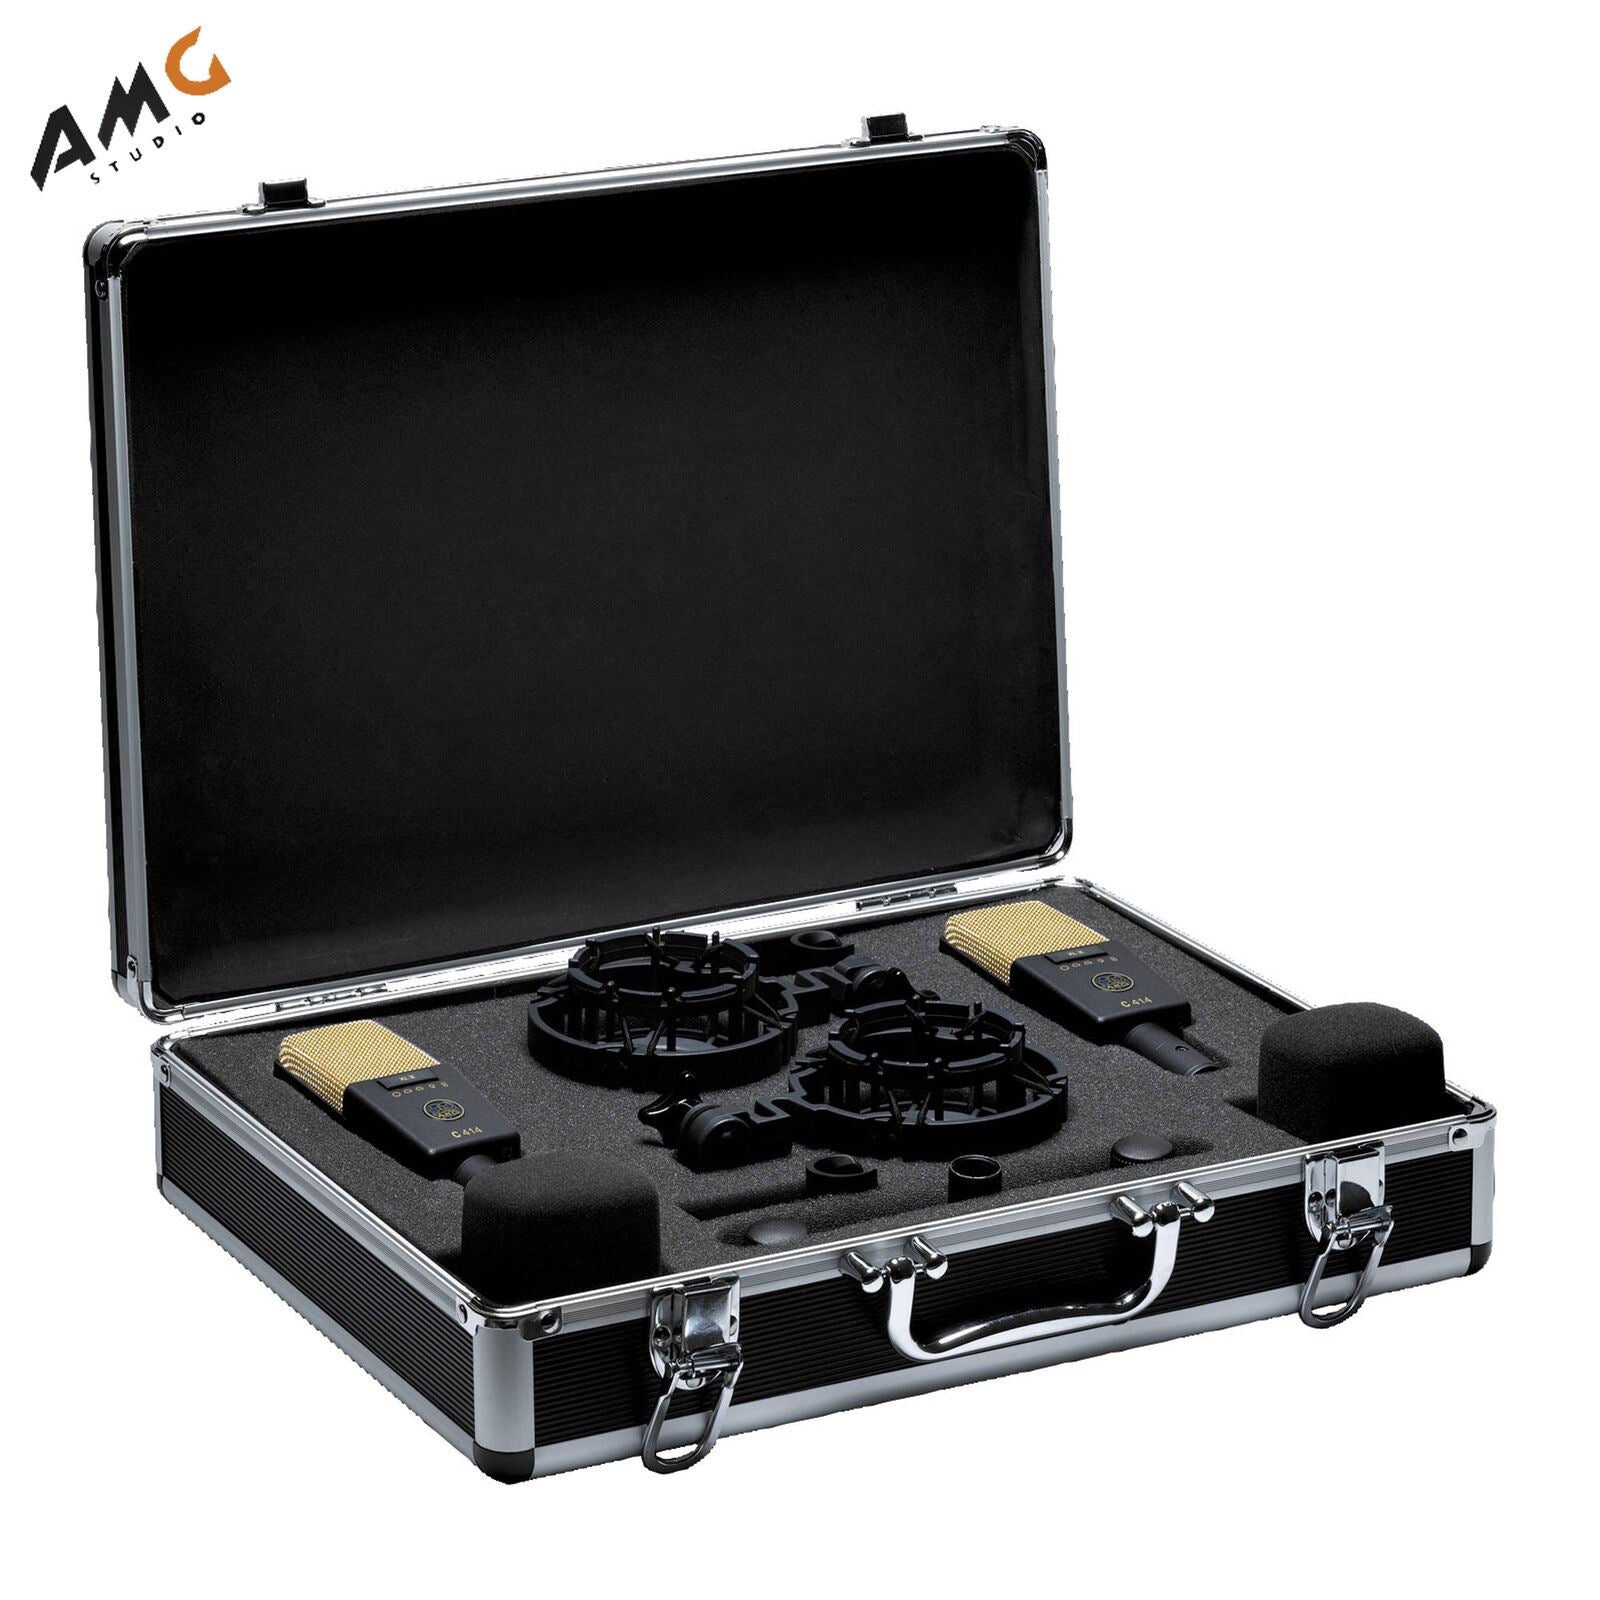 AKG C414 XLII ST Multi-Pattern Large-Diaphragm Condenser Microphone (Matched Pair Stereo Set) - Studio AMG